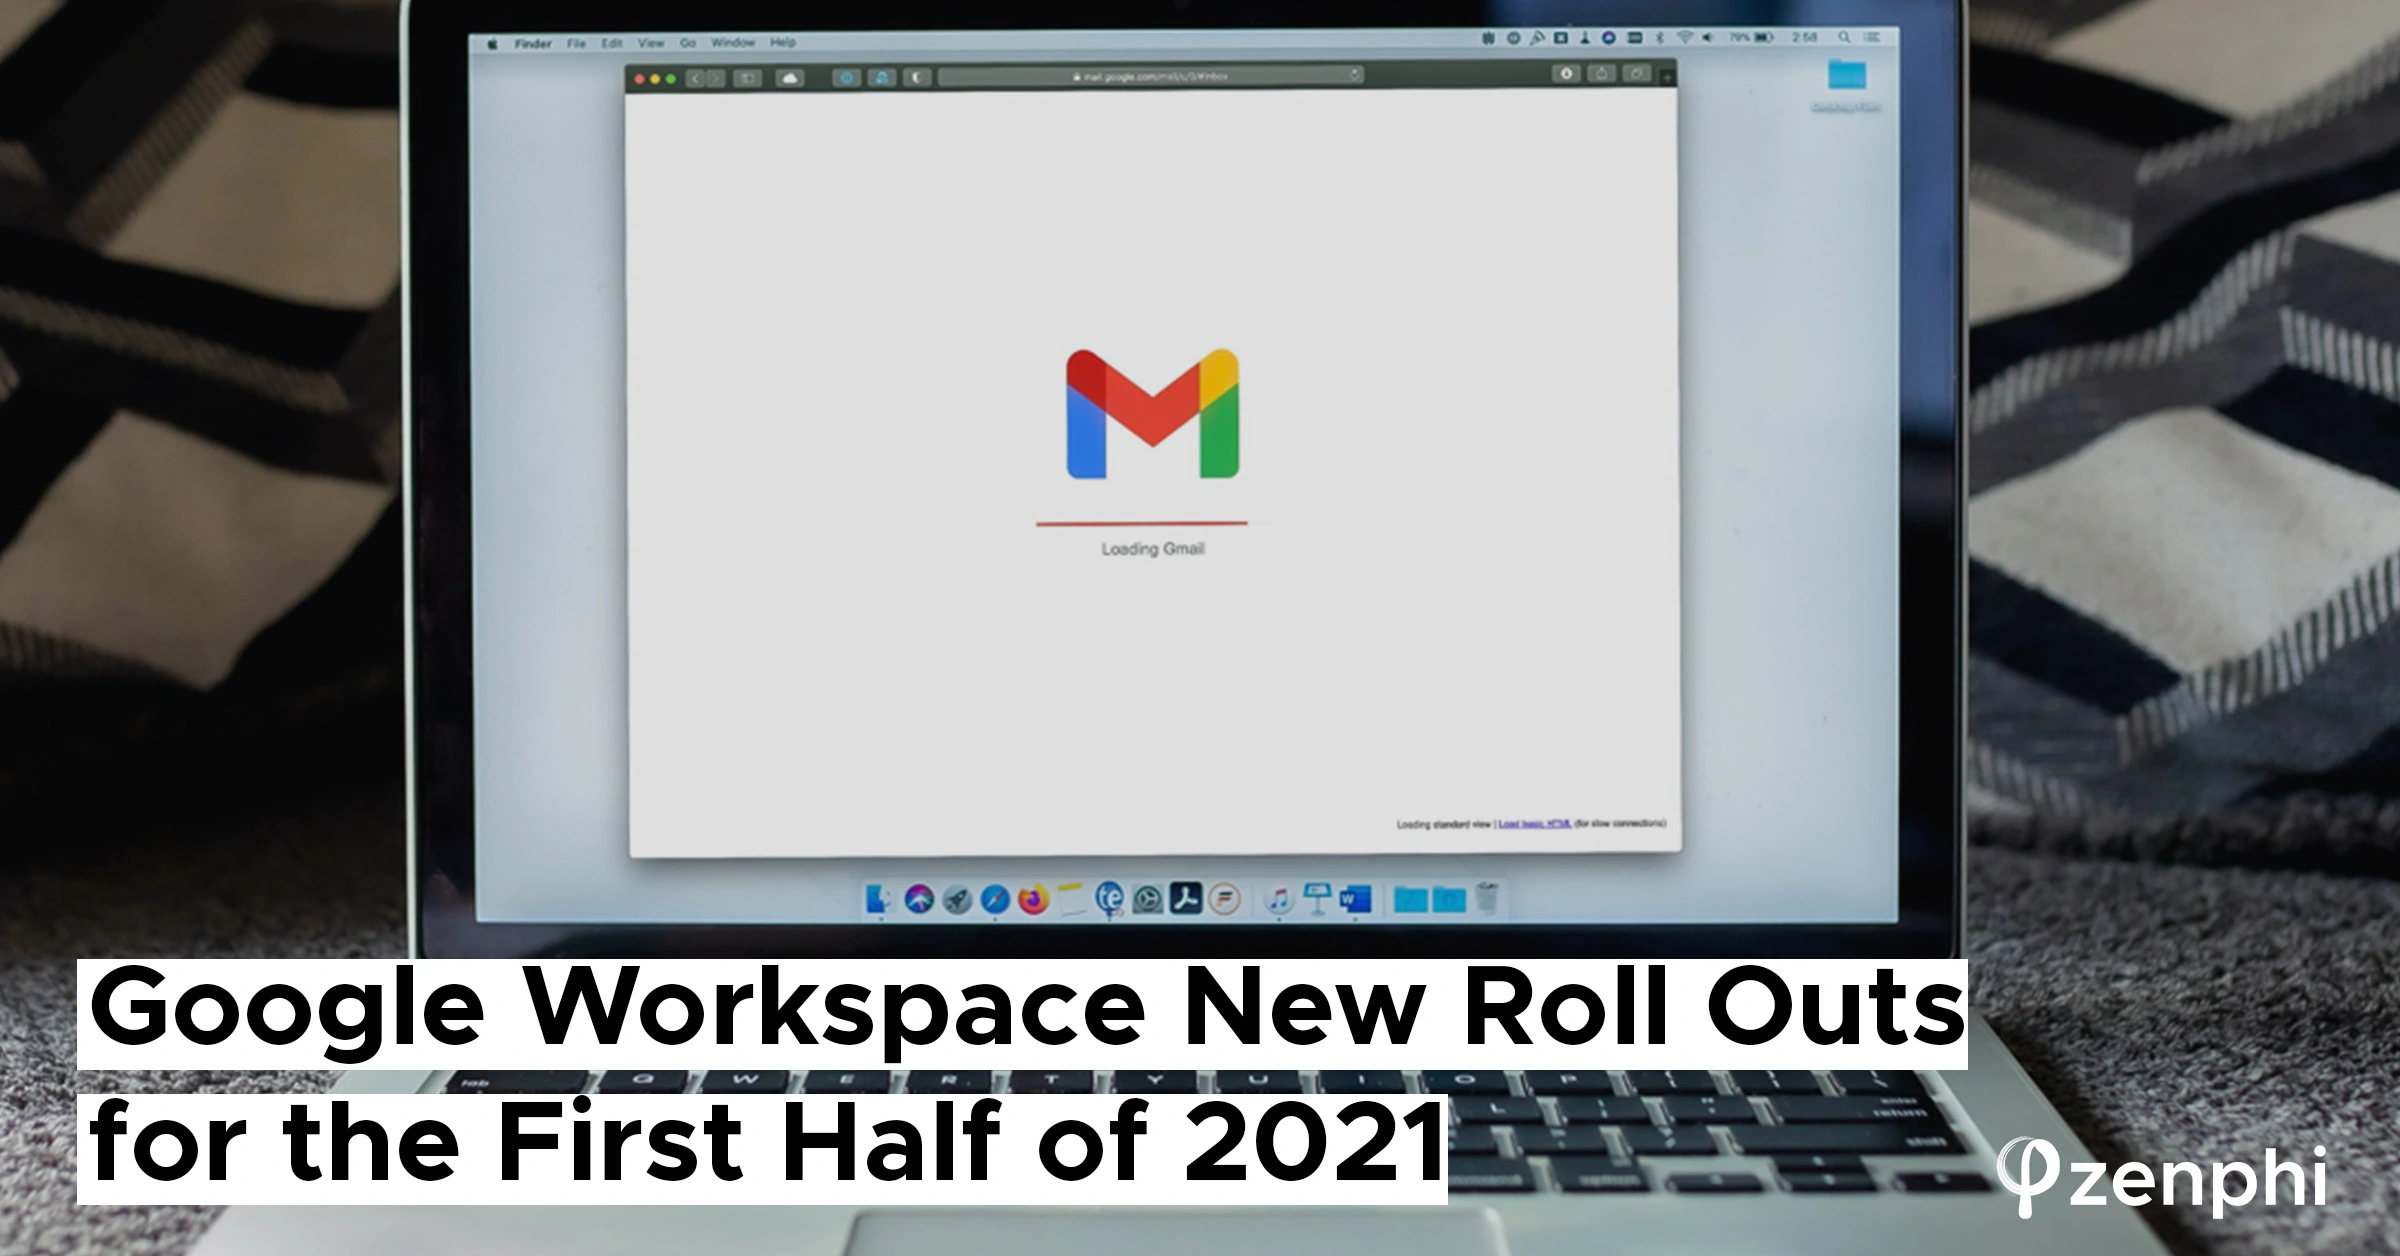 Google Workspace New Roll Outs for the First Half of 2021